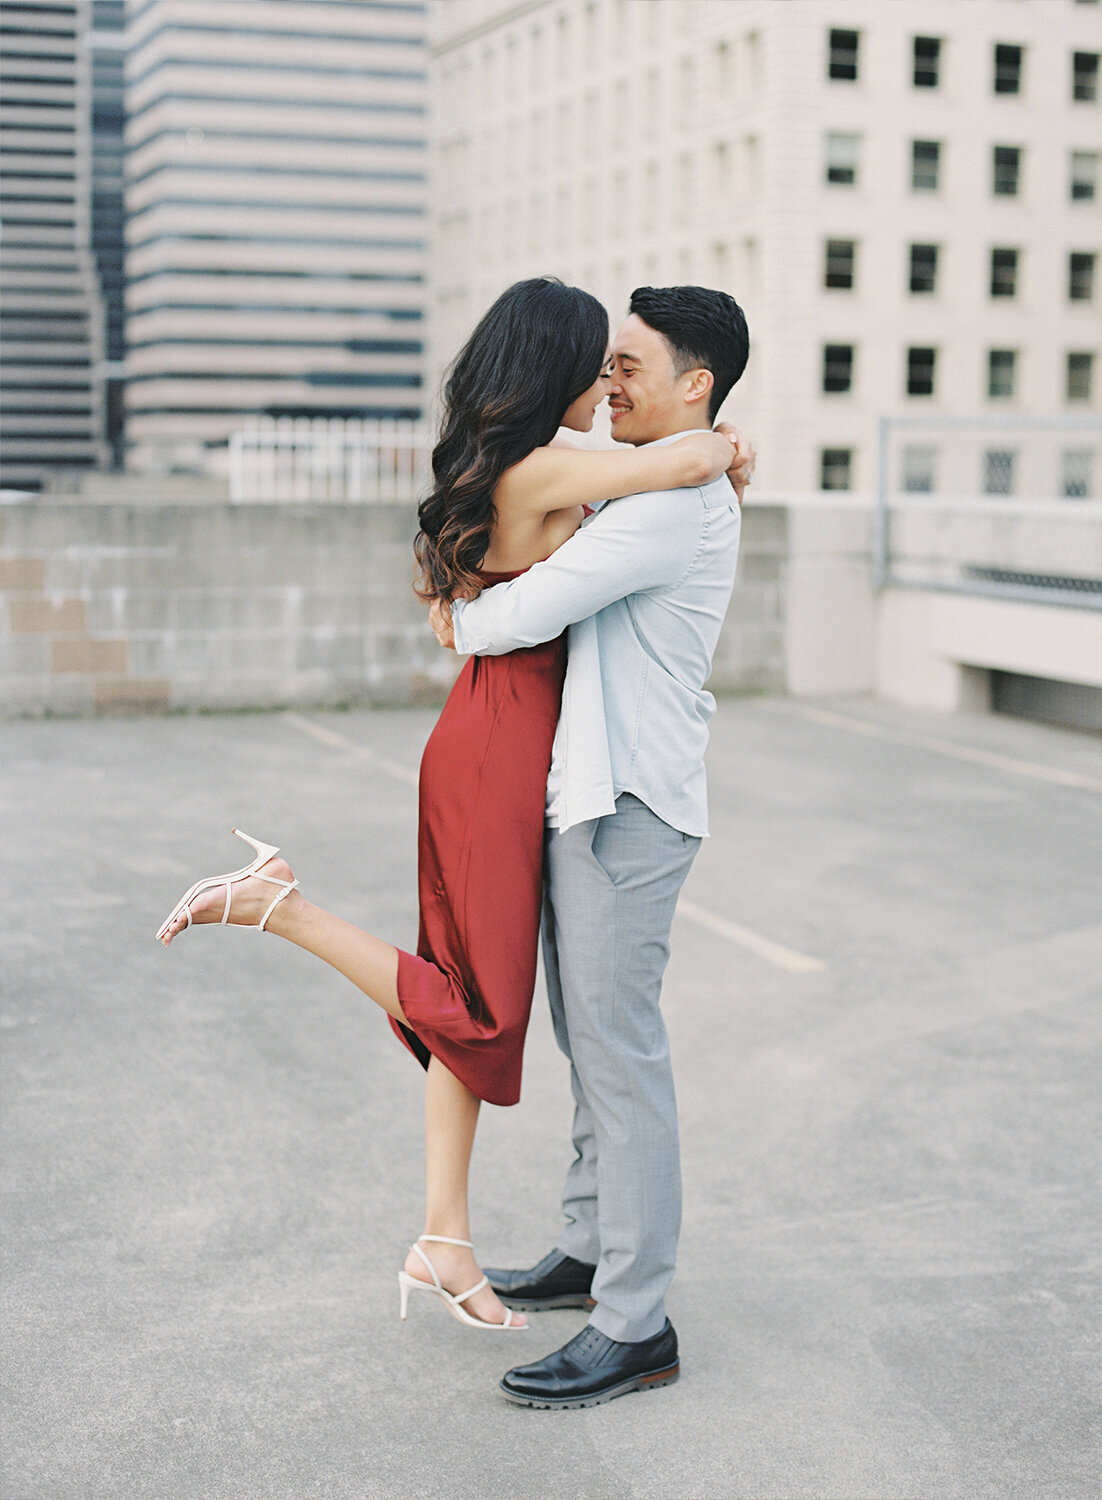 Seattle City Engagement Session on Film - Tetiana Photography - D&AJ - 5